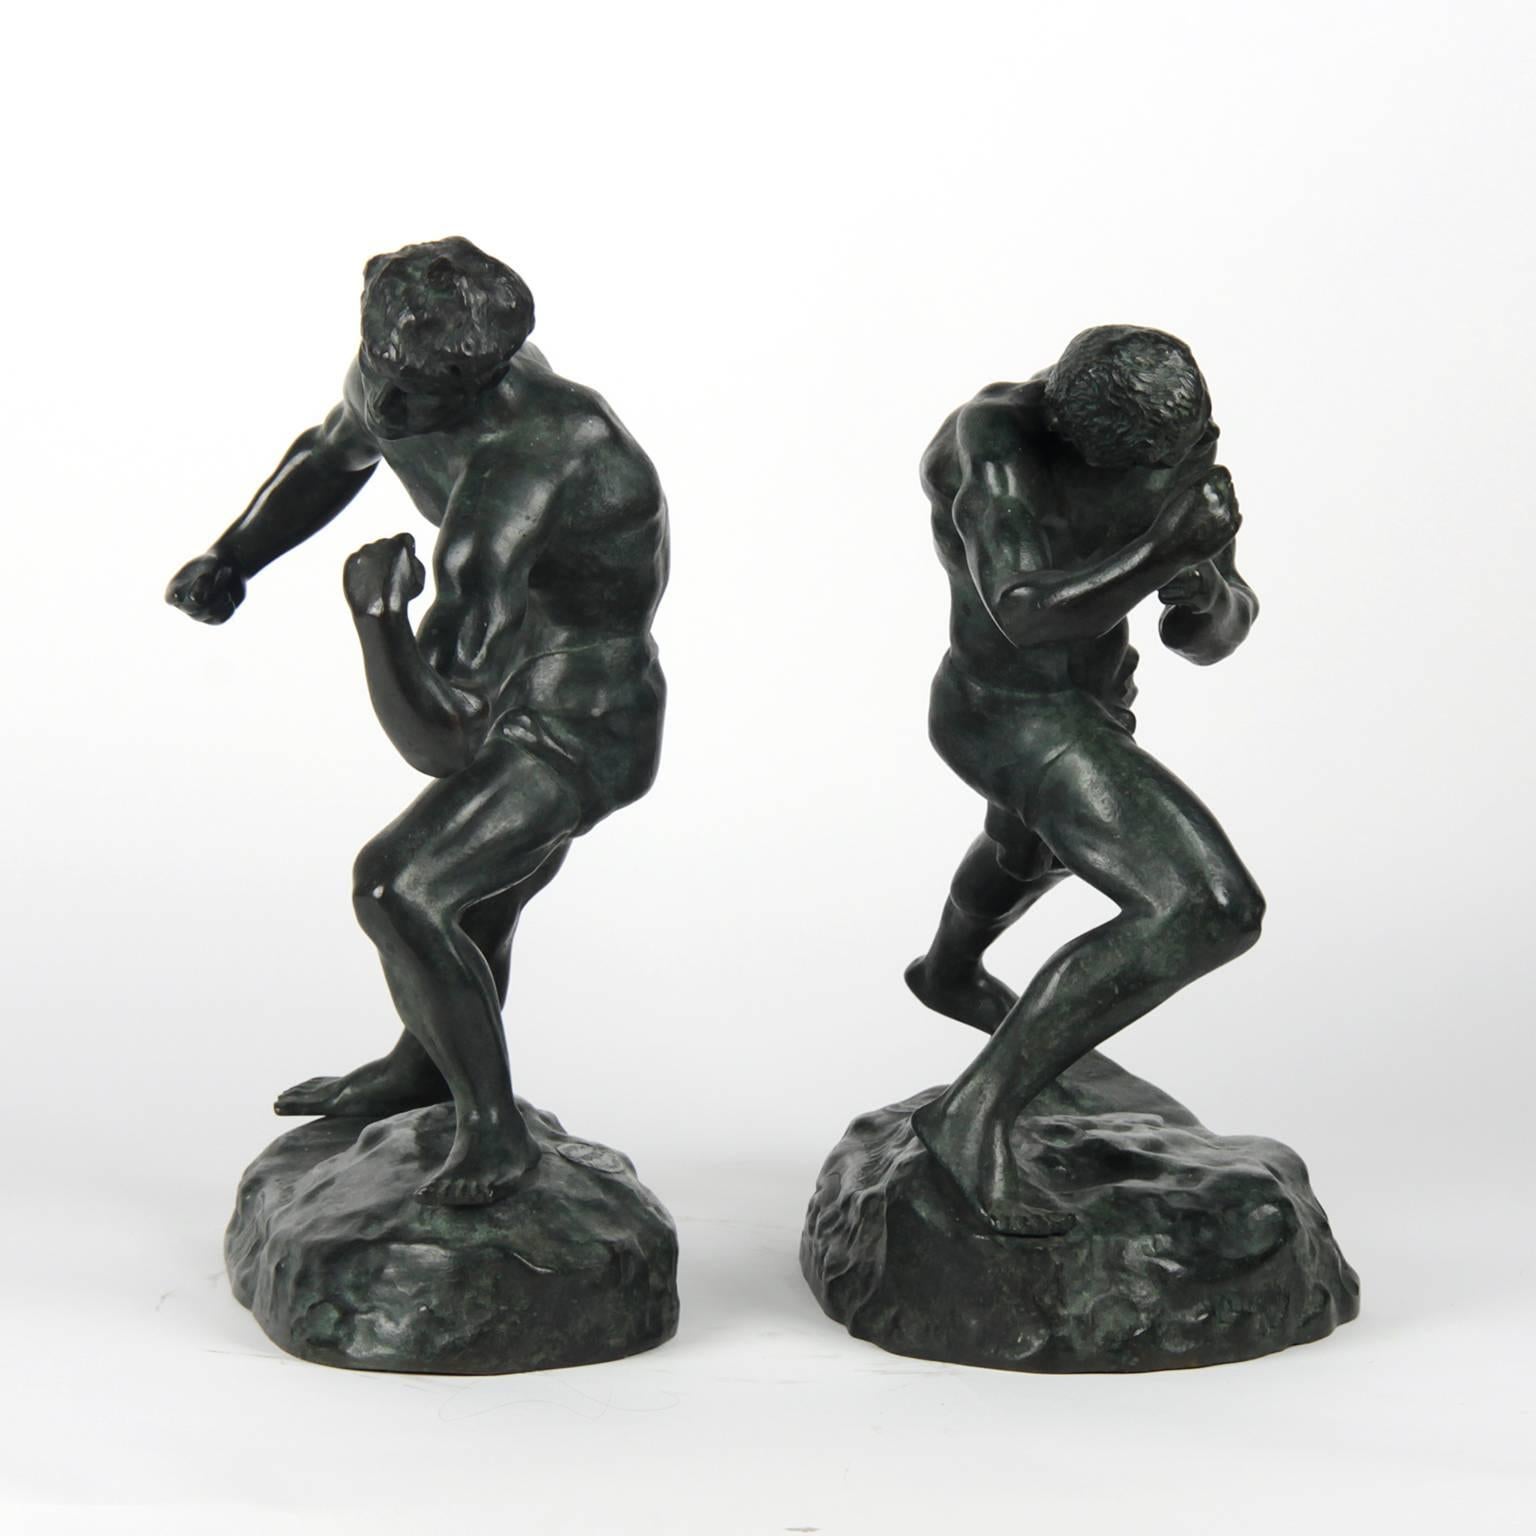 Pair of two boxing figures signed by Jef Lambeaux.
Foundry stamp by Robert de Braz
Jef Lambeaux was born in Antwerp (Belgium) and died in Bruxelles 1908.
The 